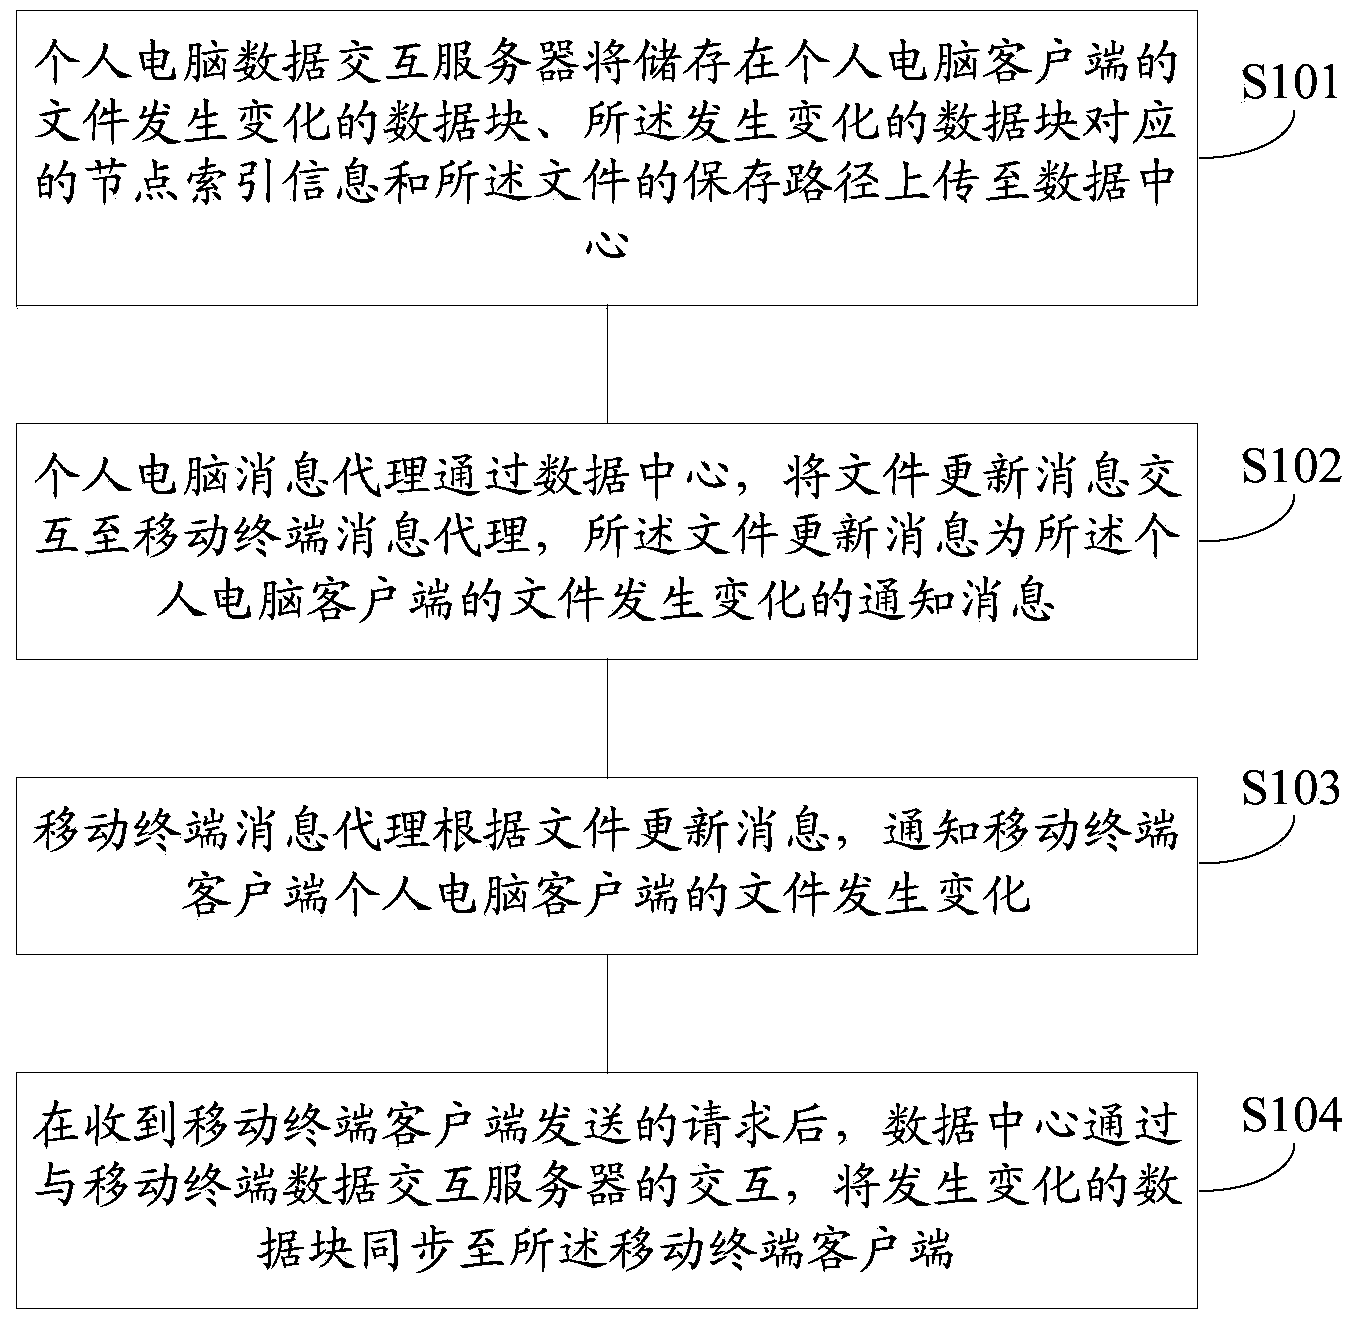 On-line storing and sharing method and system